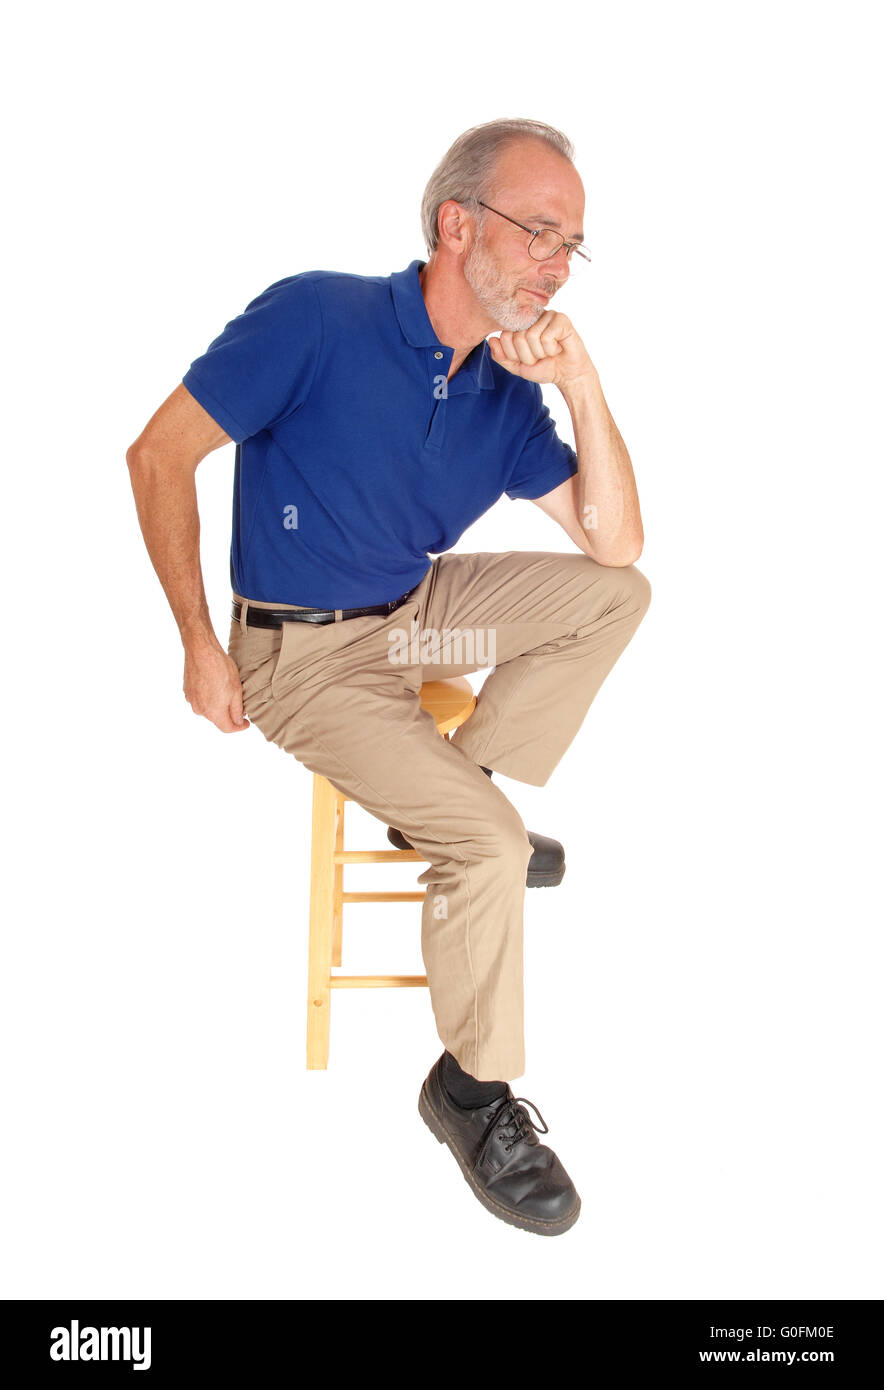 Old man sitting on chair thinking. Stock Photo